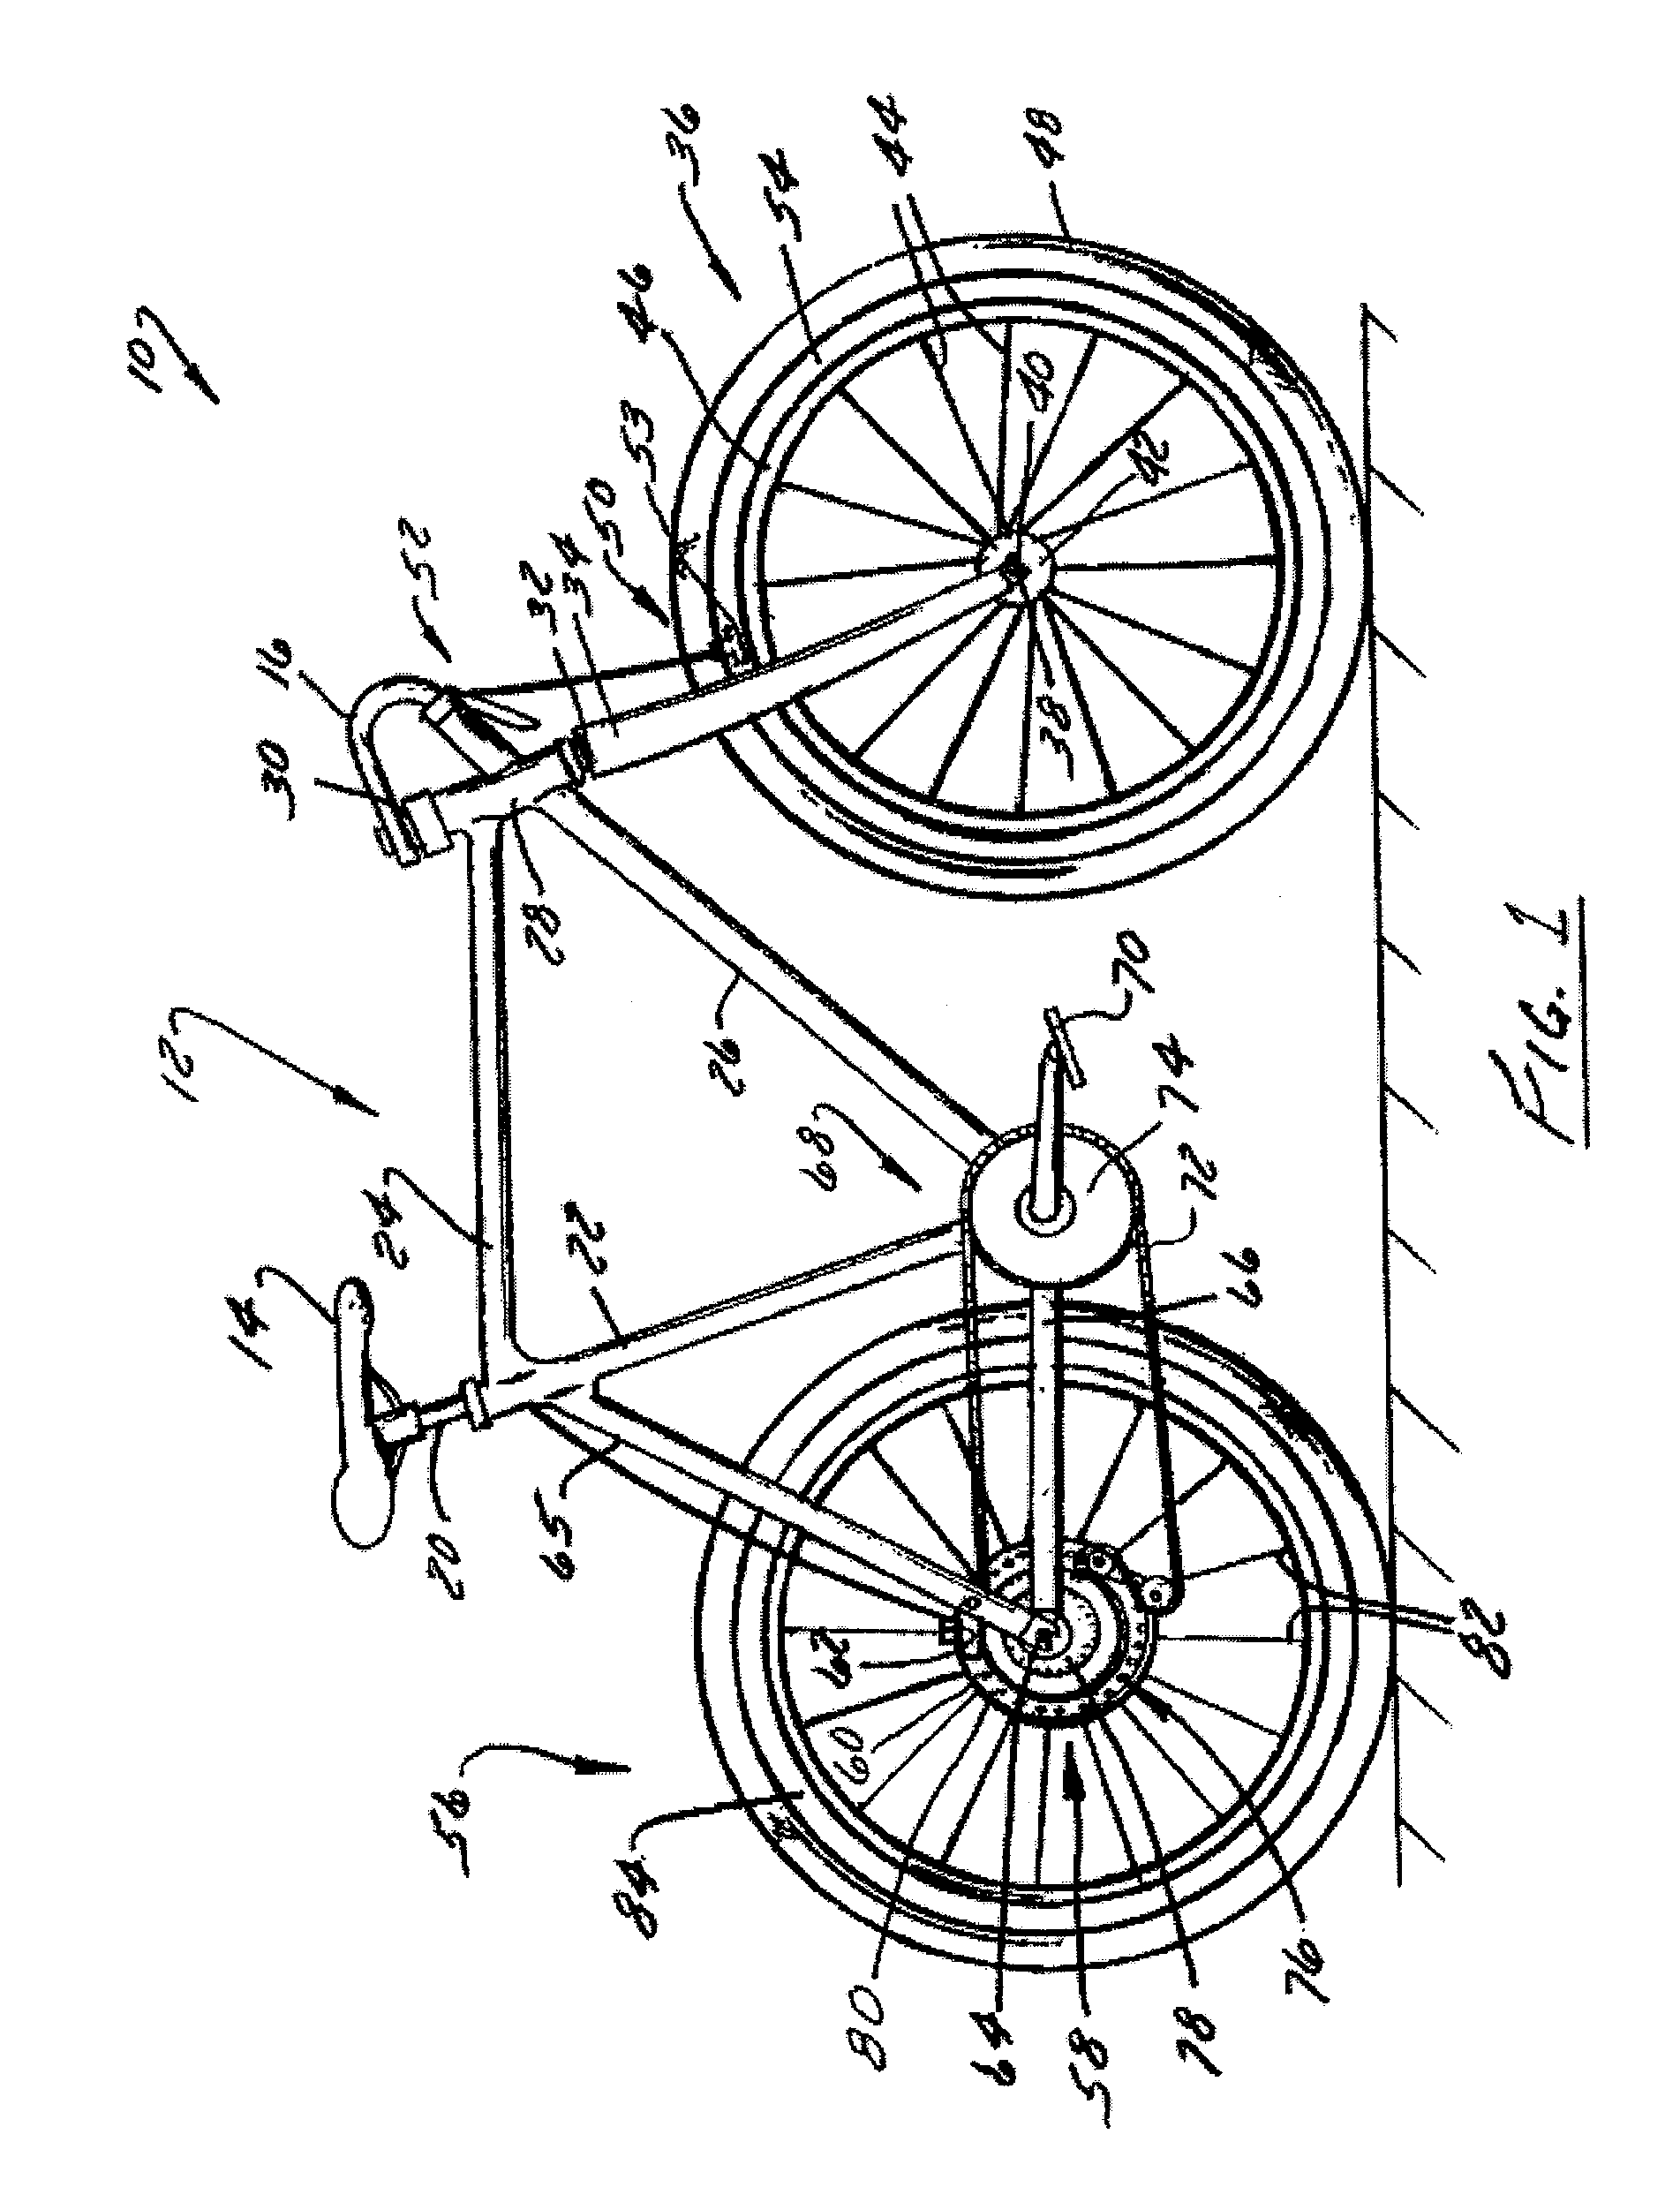 Bicycle Wheel With Over-Sized Spokes